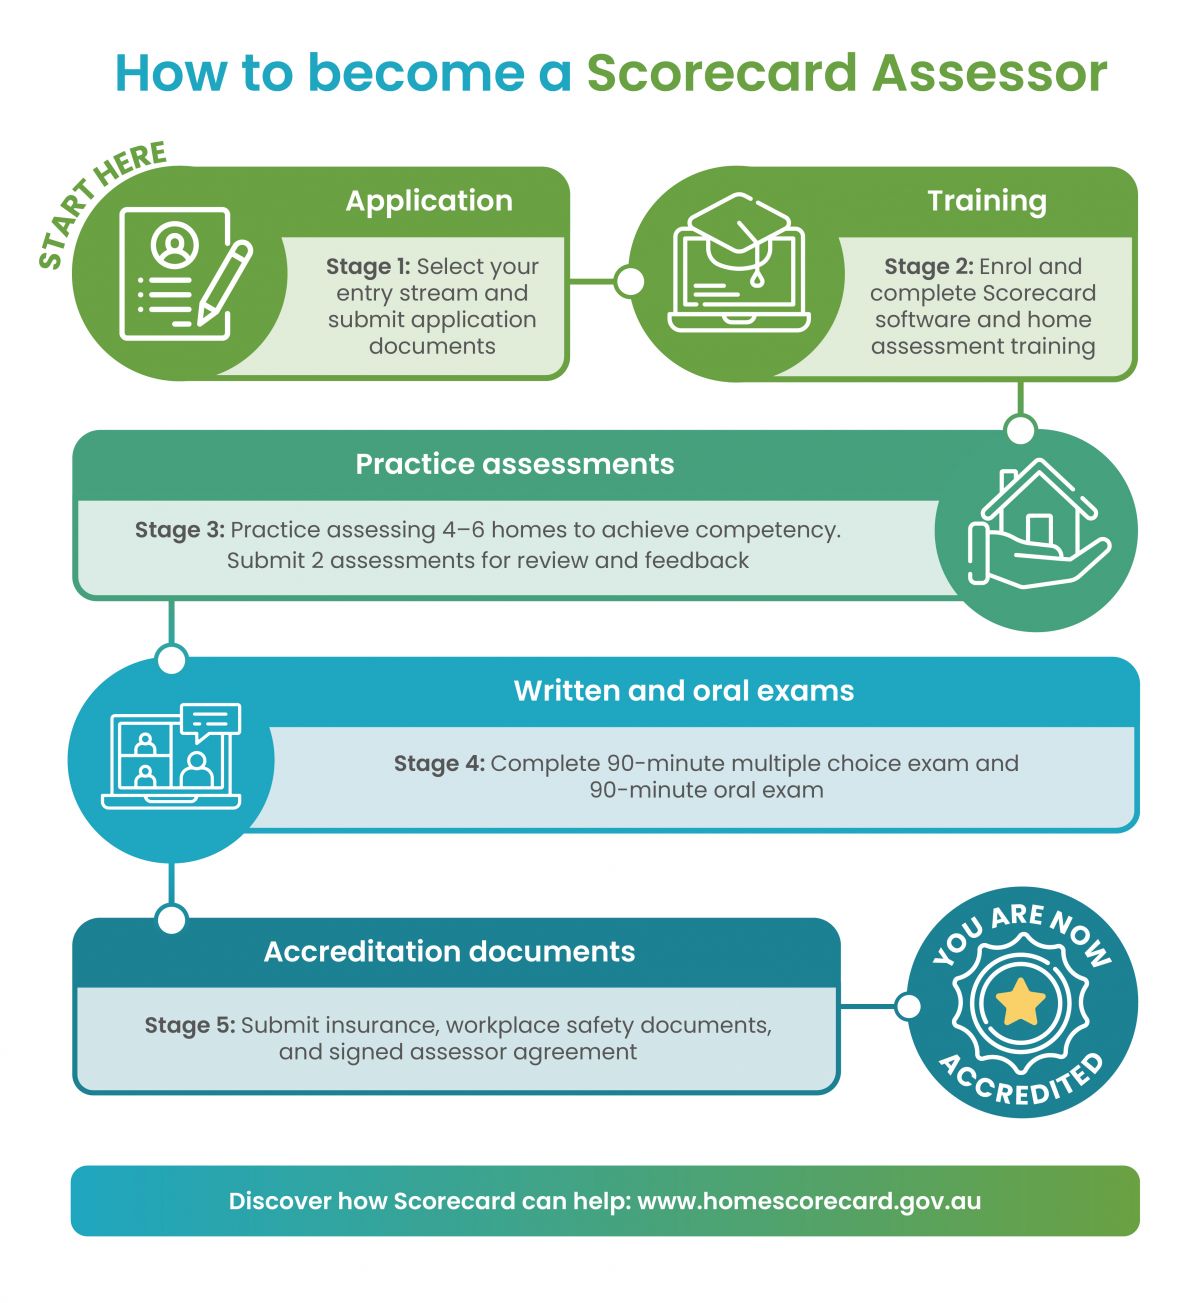 This infographic shows the 5 stages to the Residential Efficiency Scorecard accreditation process